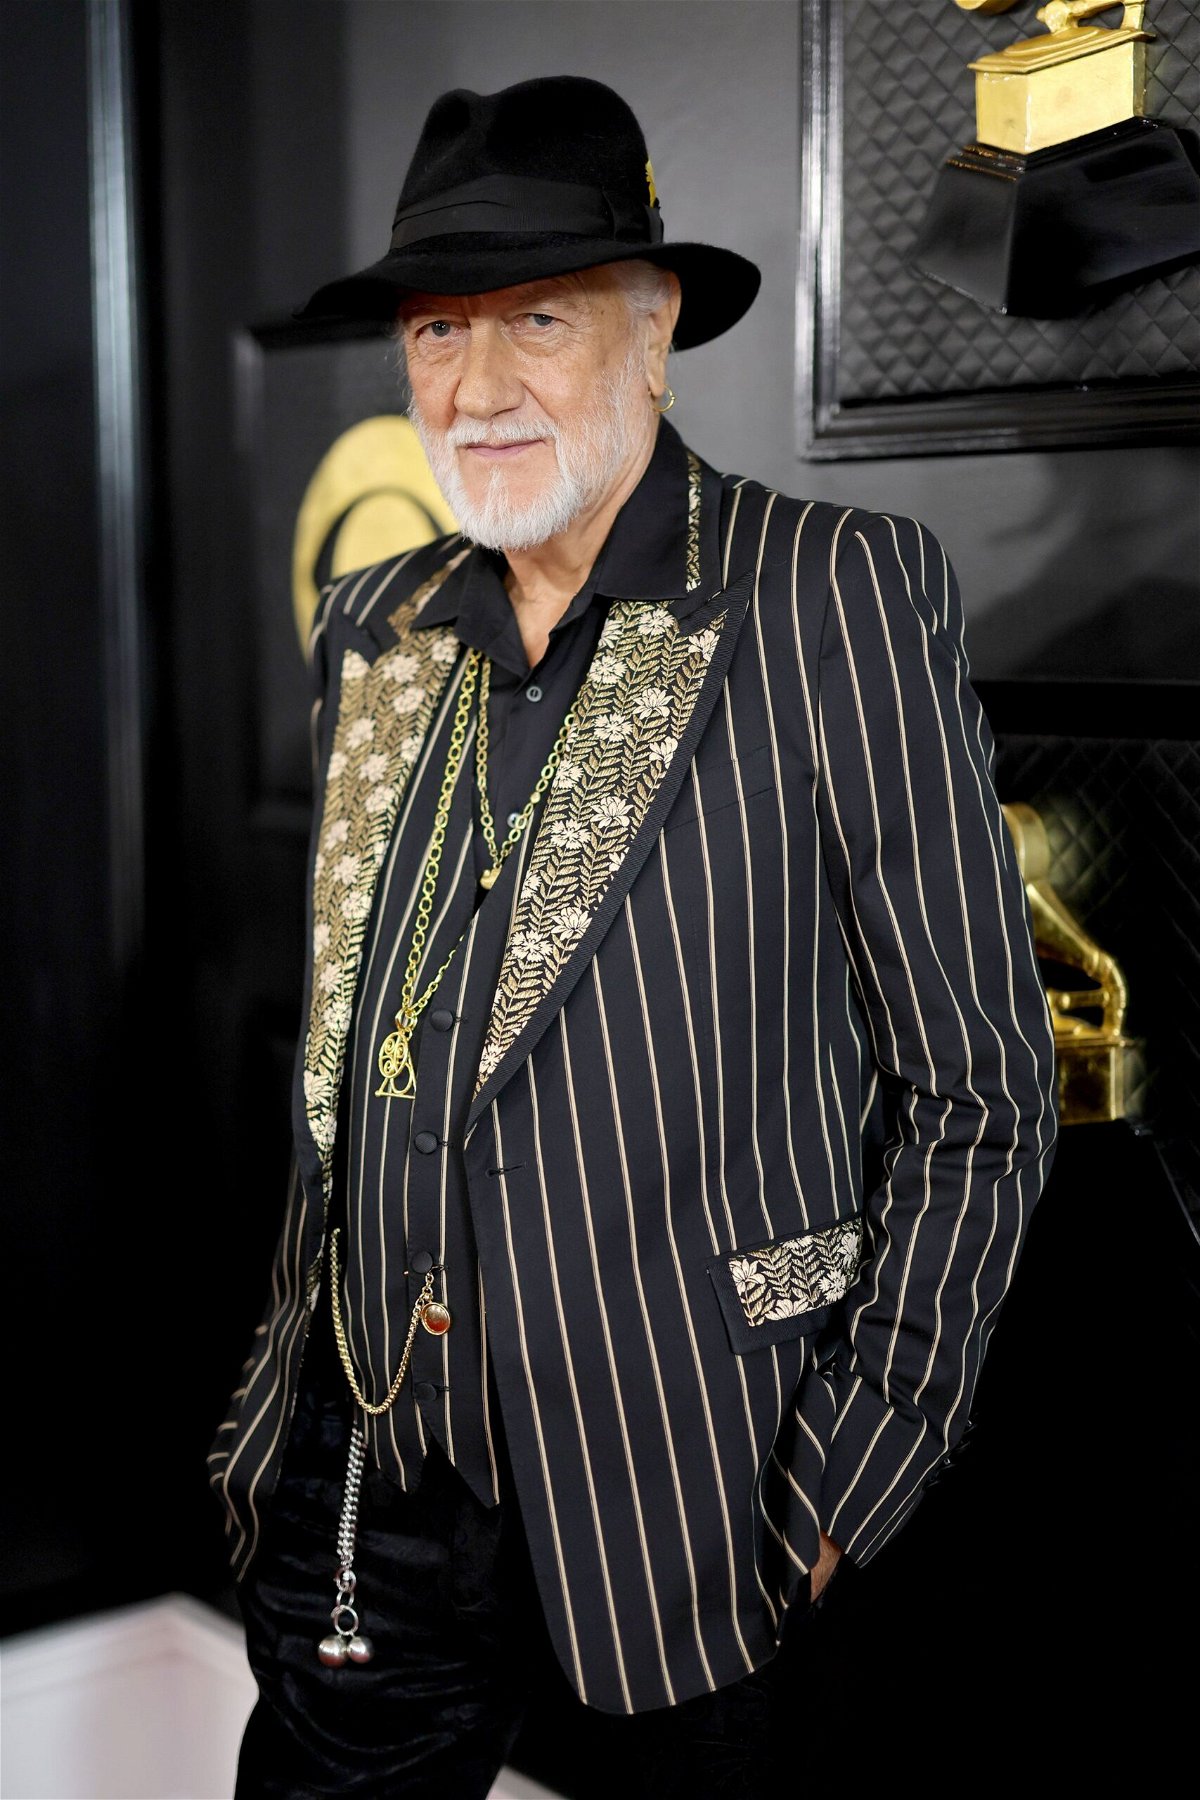 Mick Fleetwood is seen here at the 65th Grammy Awards on February 5 in Los Angeles, California.